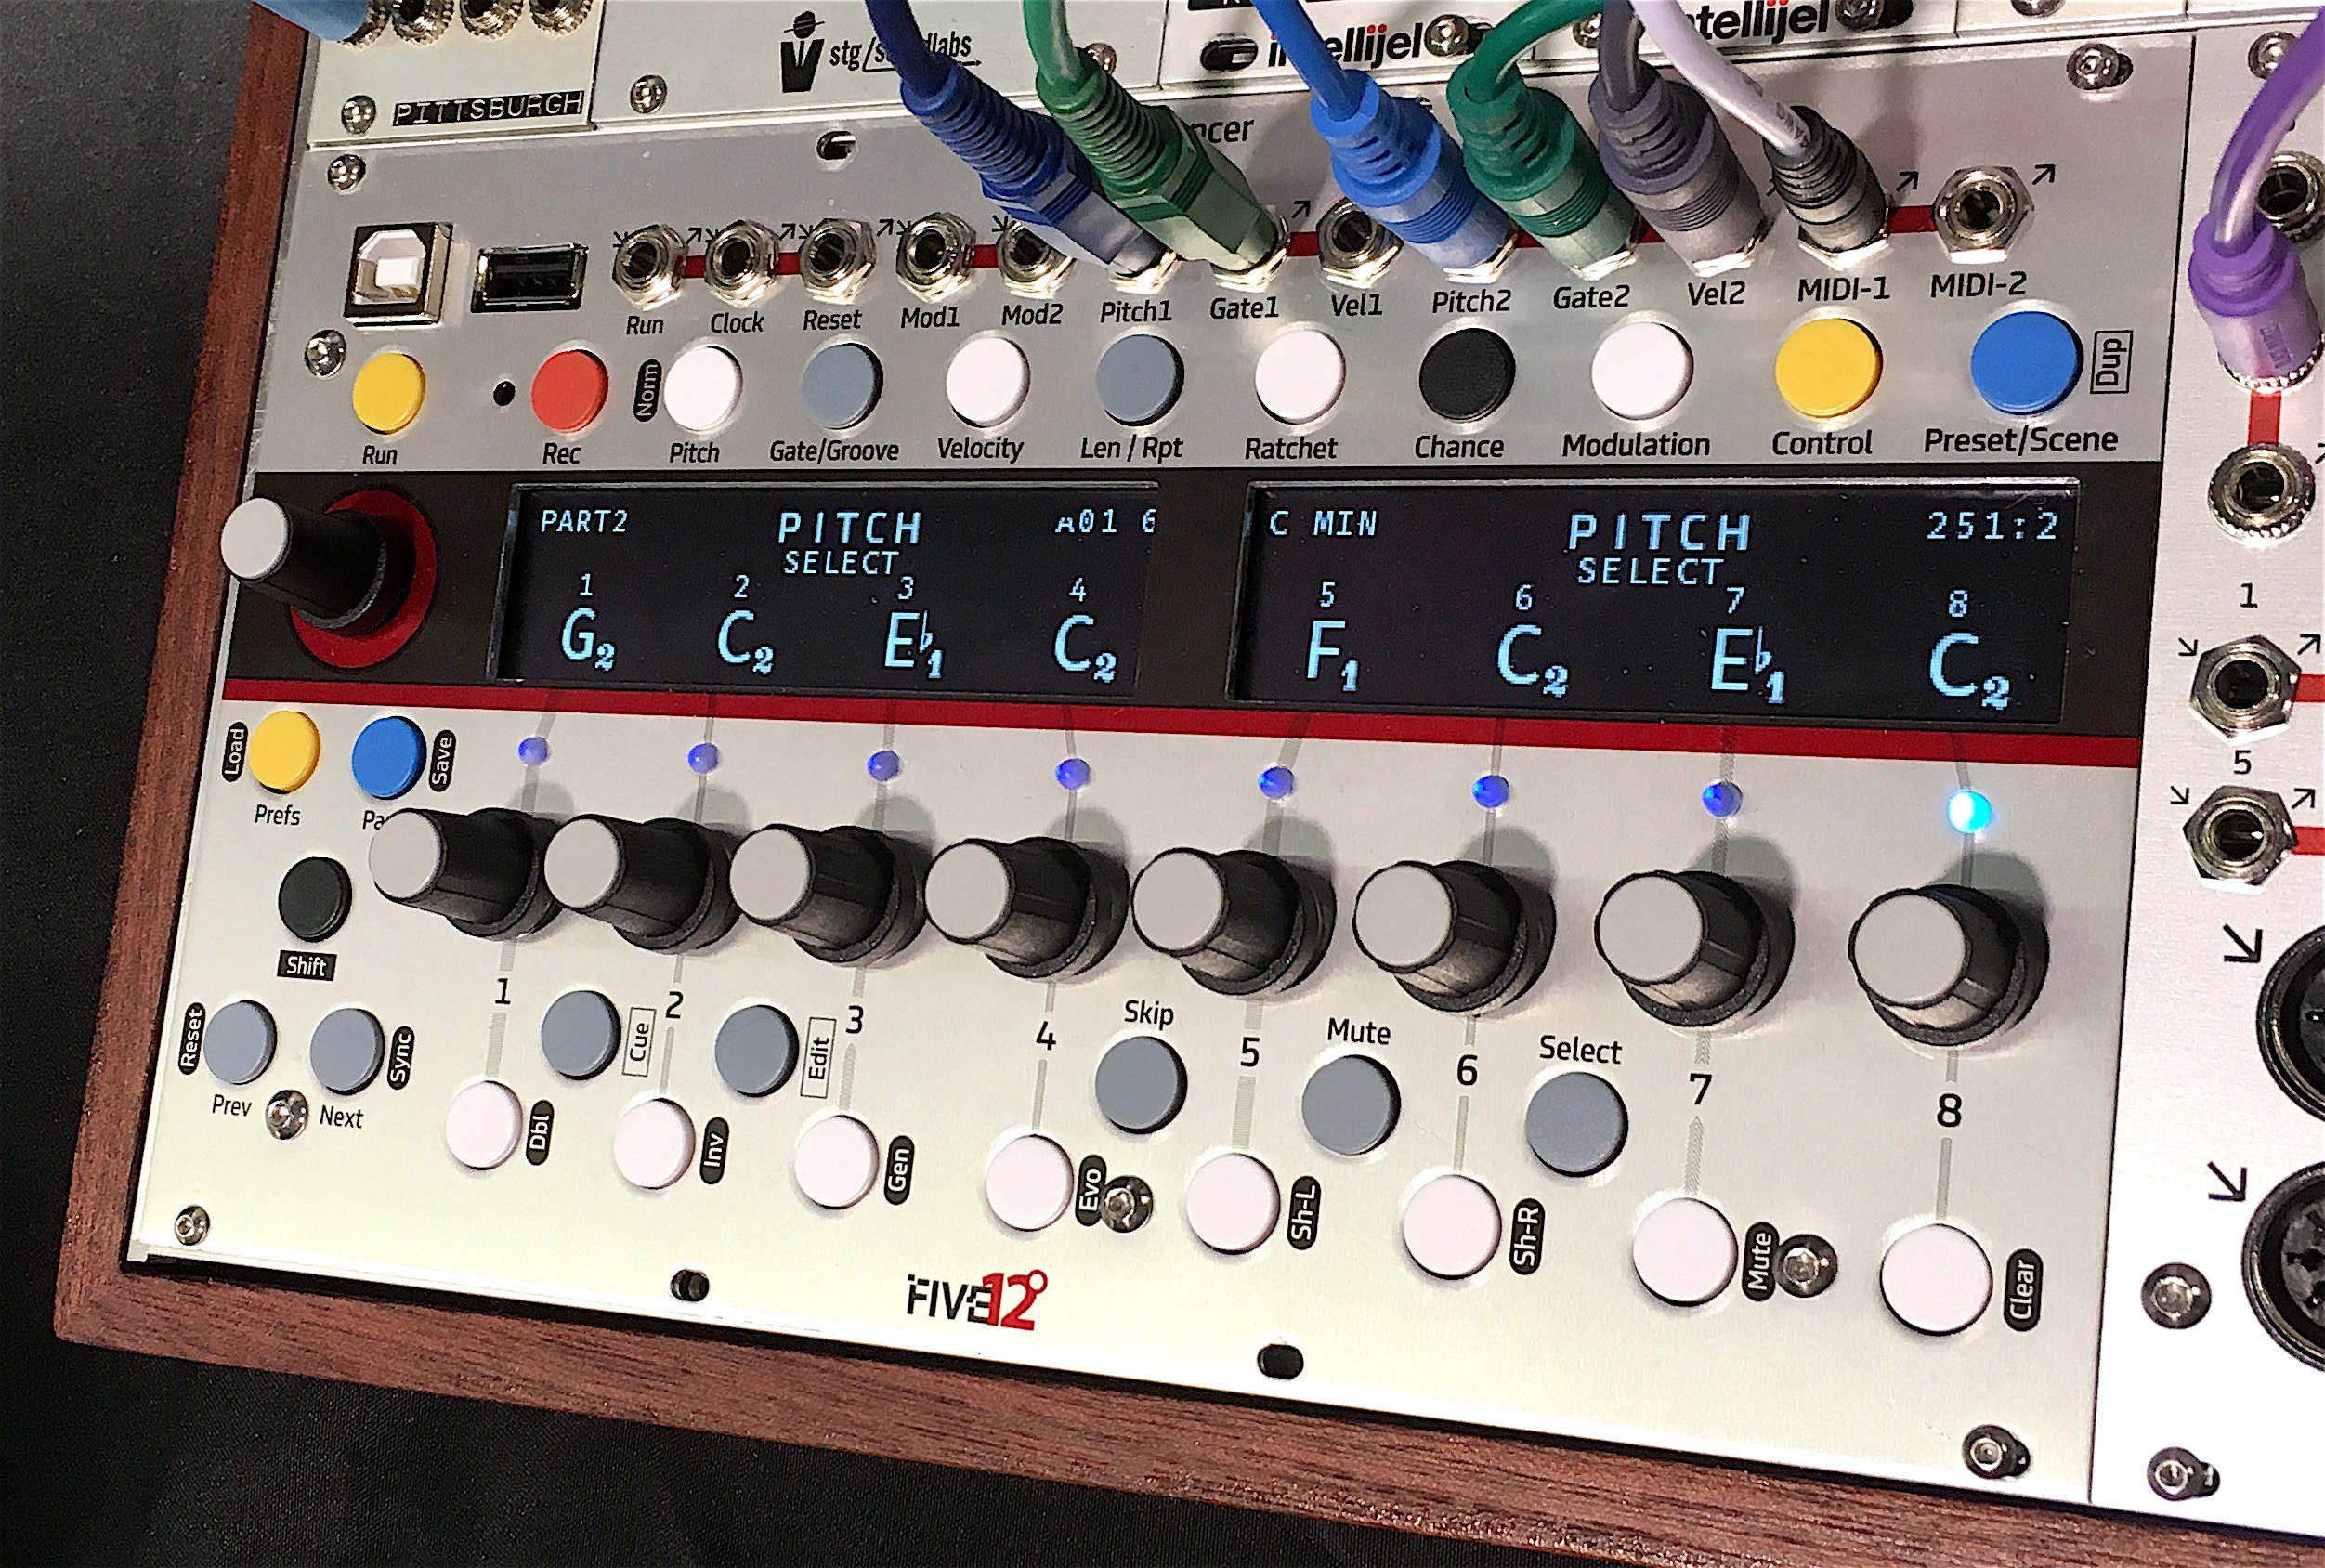 8 Things Considered at NAMM 2018